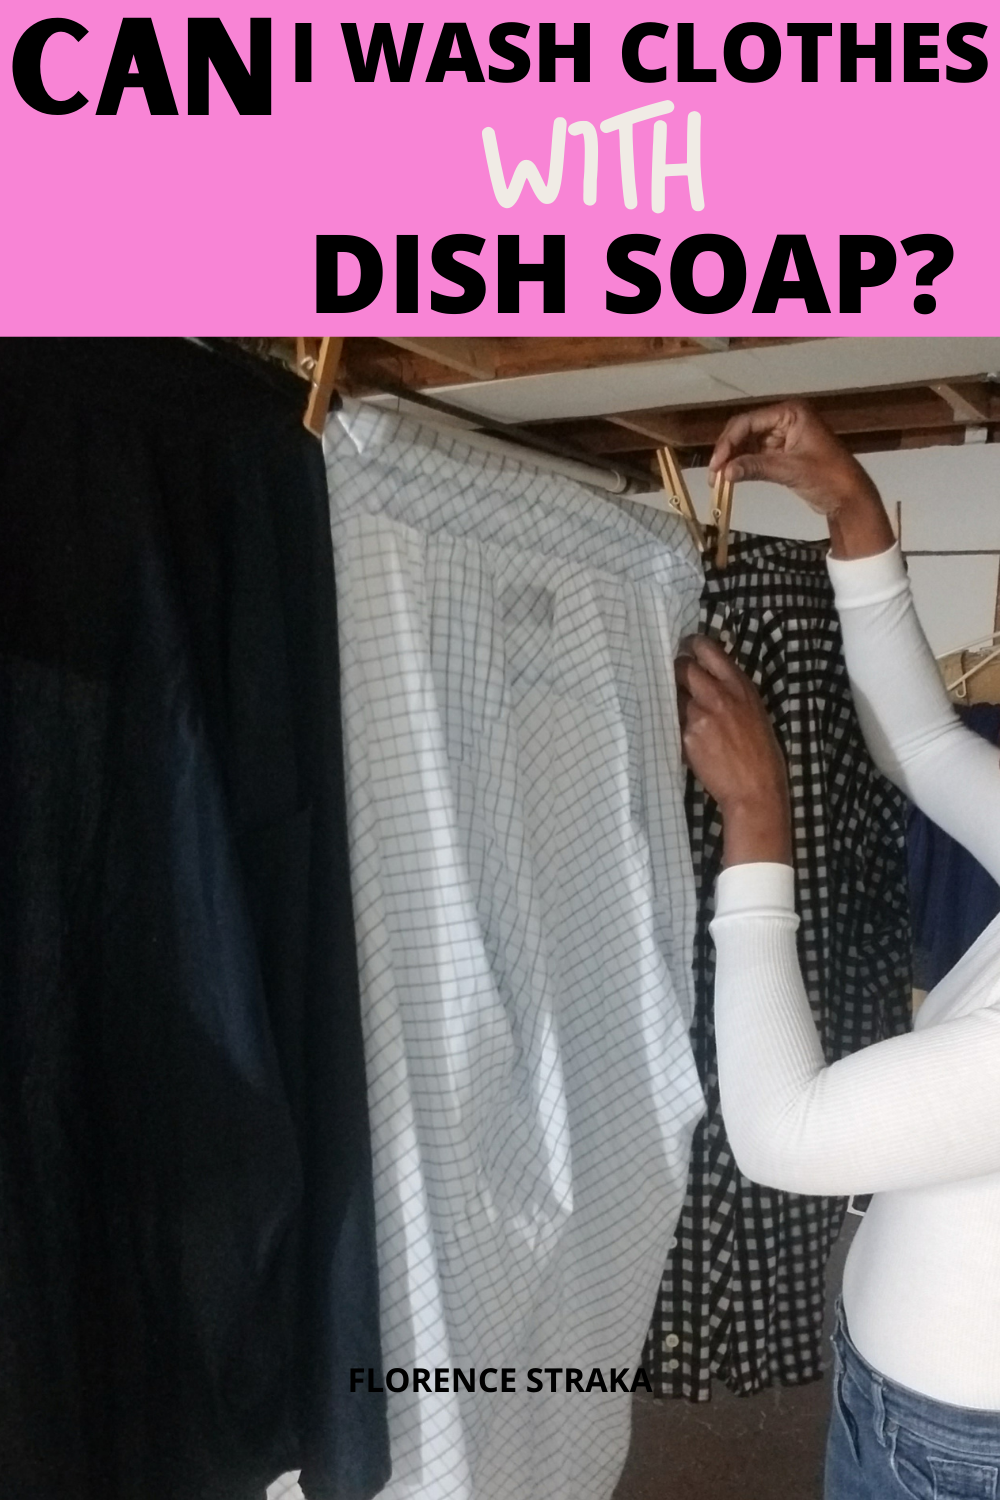 Can I wash clothes with dish soap